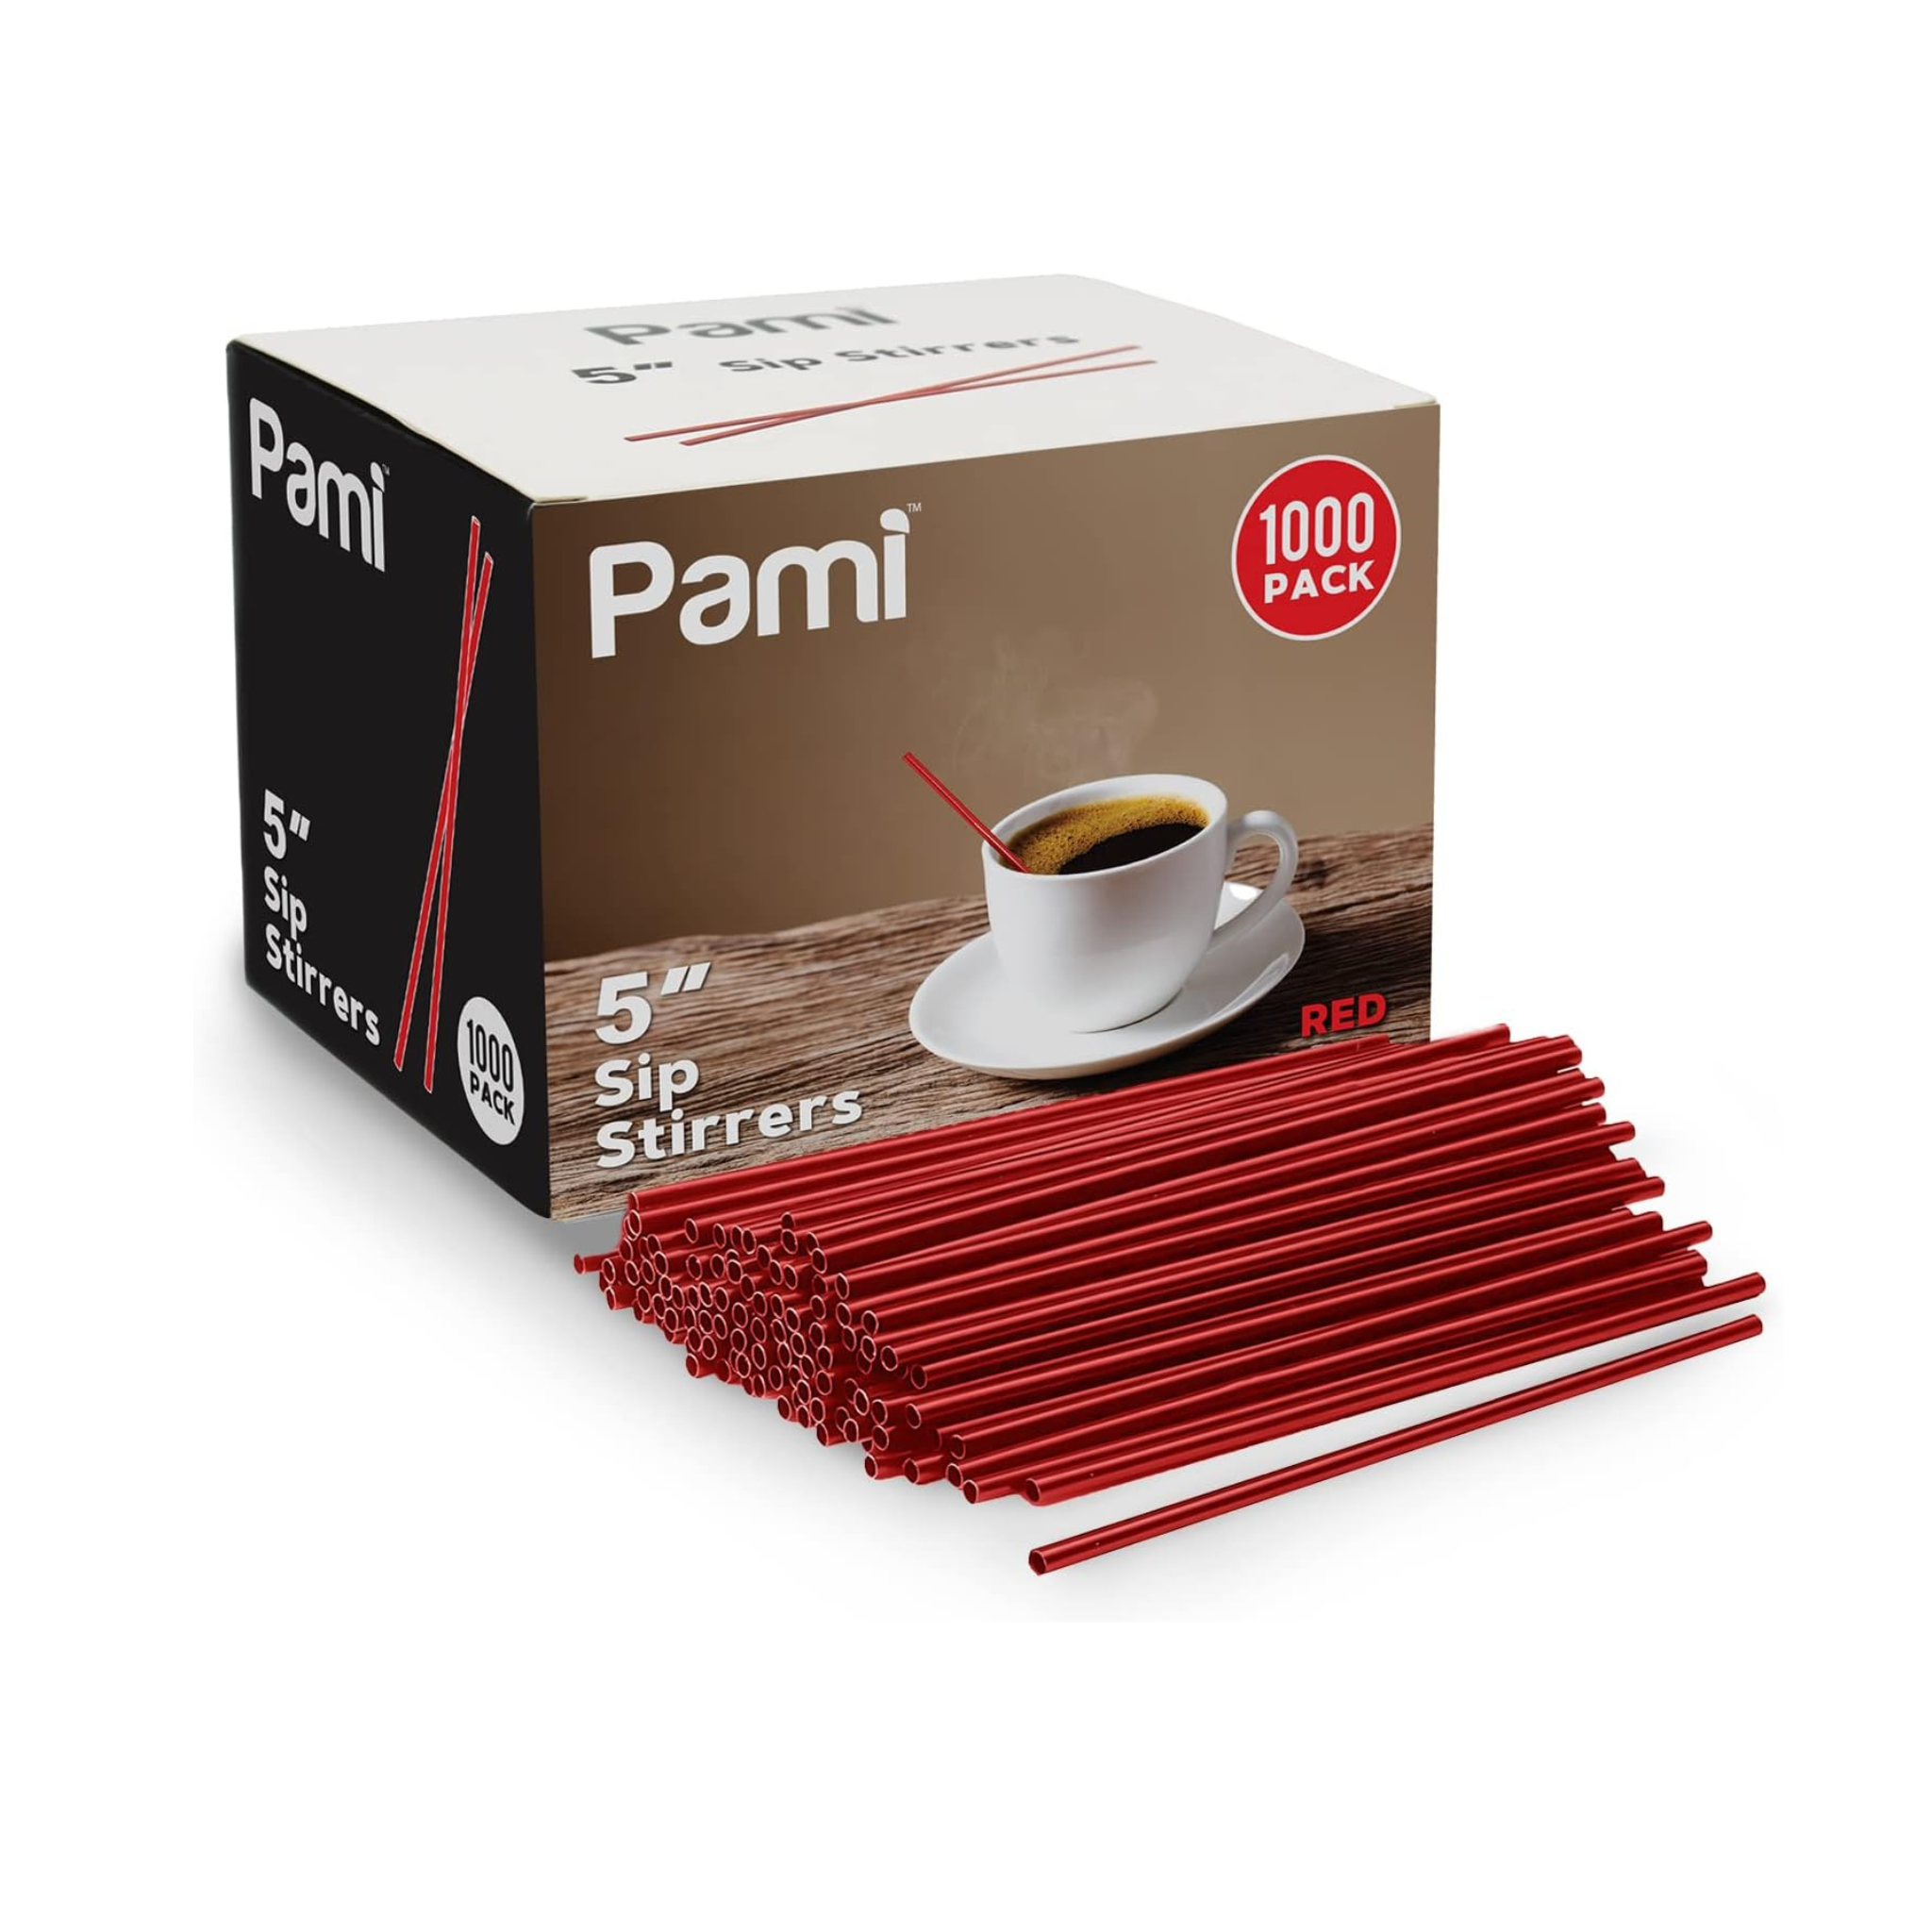 Pami Disposable Coffee Stirers, 1000 Pack